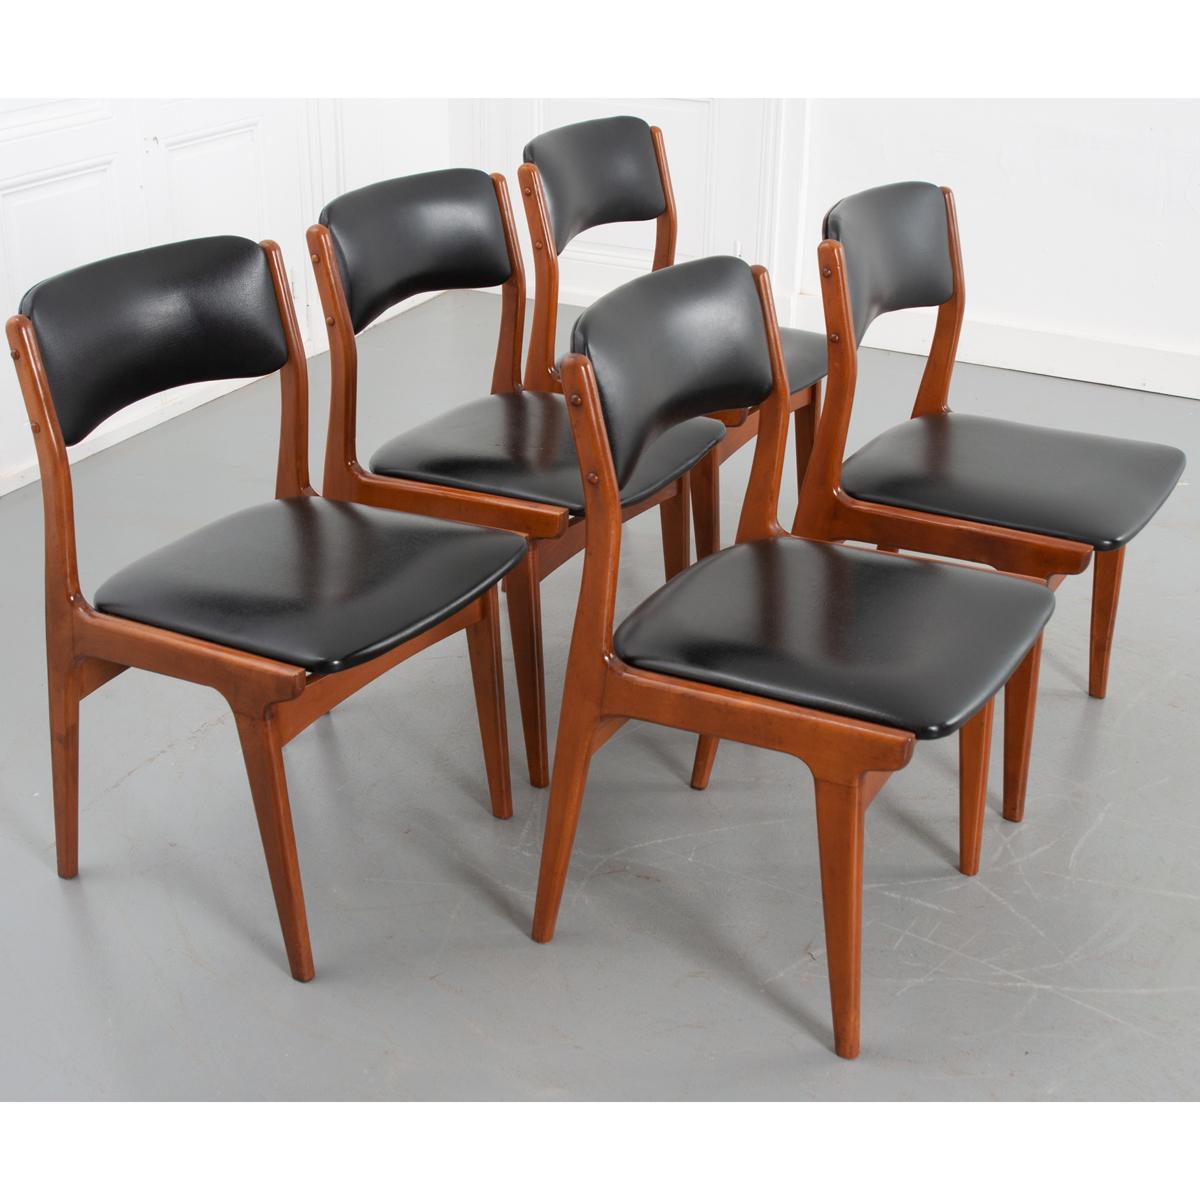 Excellent set of five Scandinavian design dining chairs. Made of teak wood with black vinyl seat cushions and backrests. Seats: 17-?”H. See detailed pictures for condition.